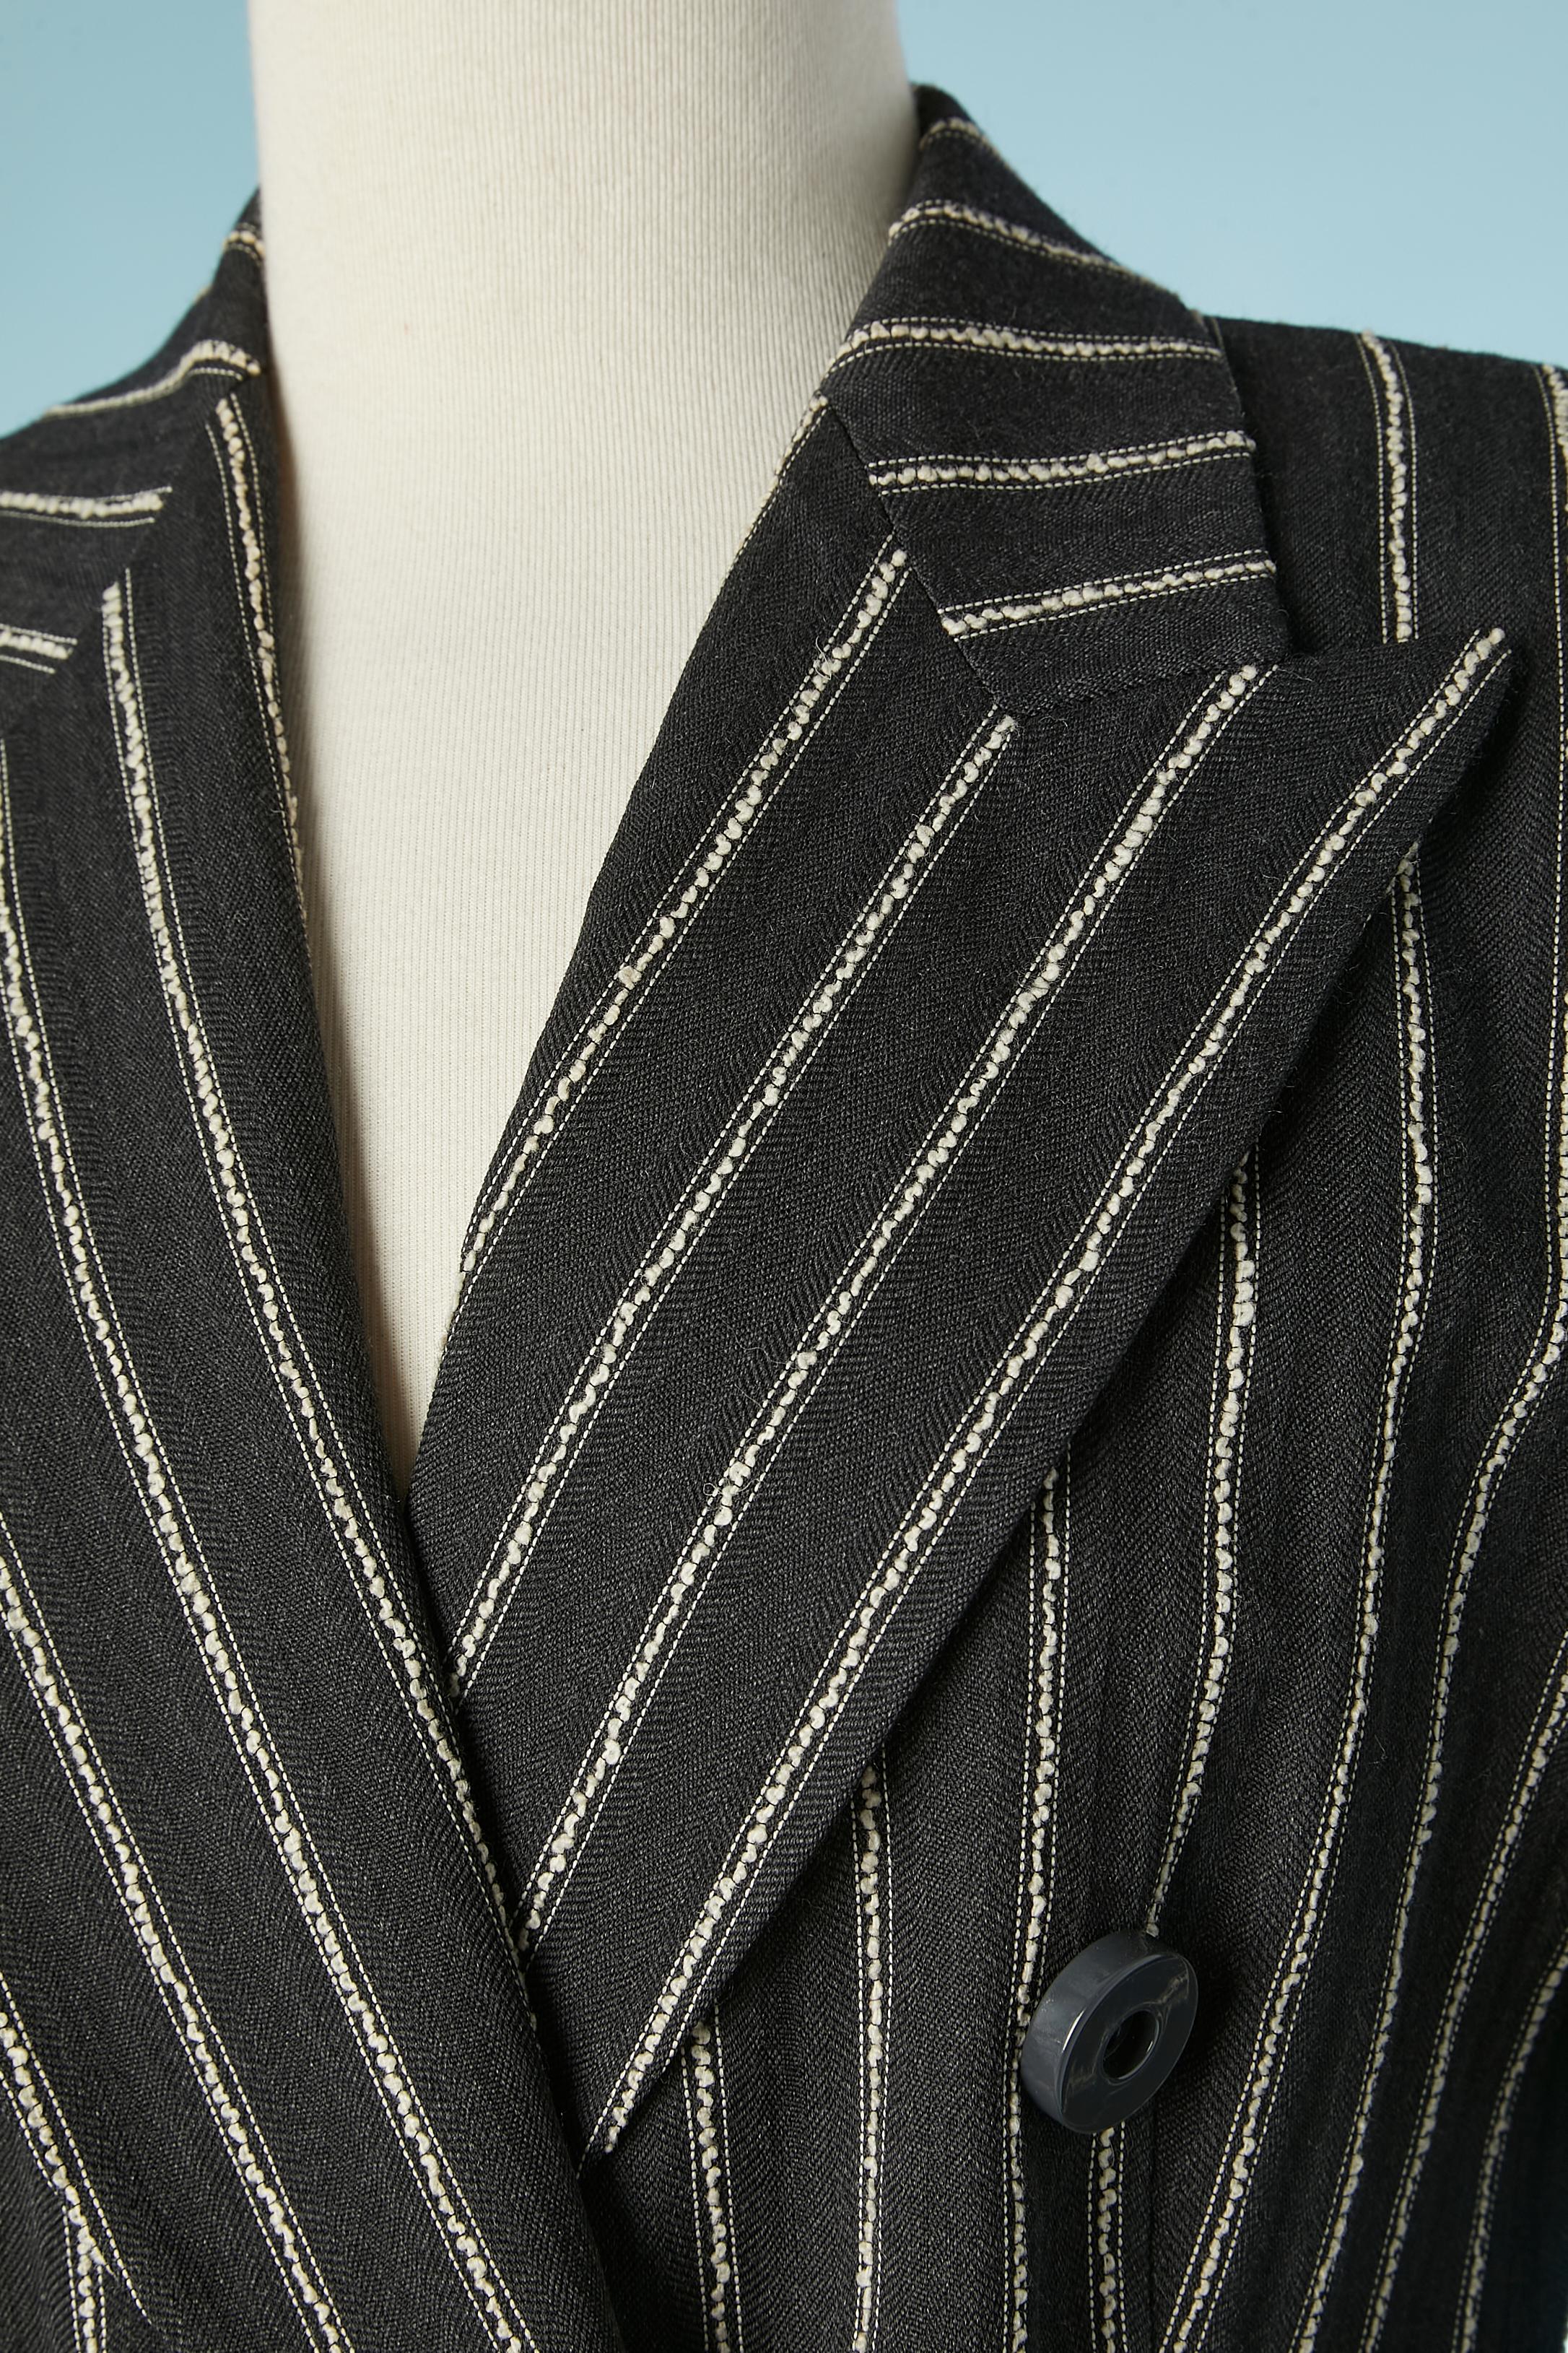 Anthracite striped wool and cotton  double-breasted skirt suit. Fabric composition: 77% wool, 23% cotton.Lining: 63% acetate, 37% cupro. 
Shoulder pads. Pockets on both side on the jacket. 
SIZE 44 (It) 8 (Us) 